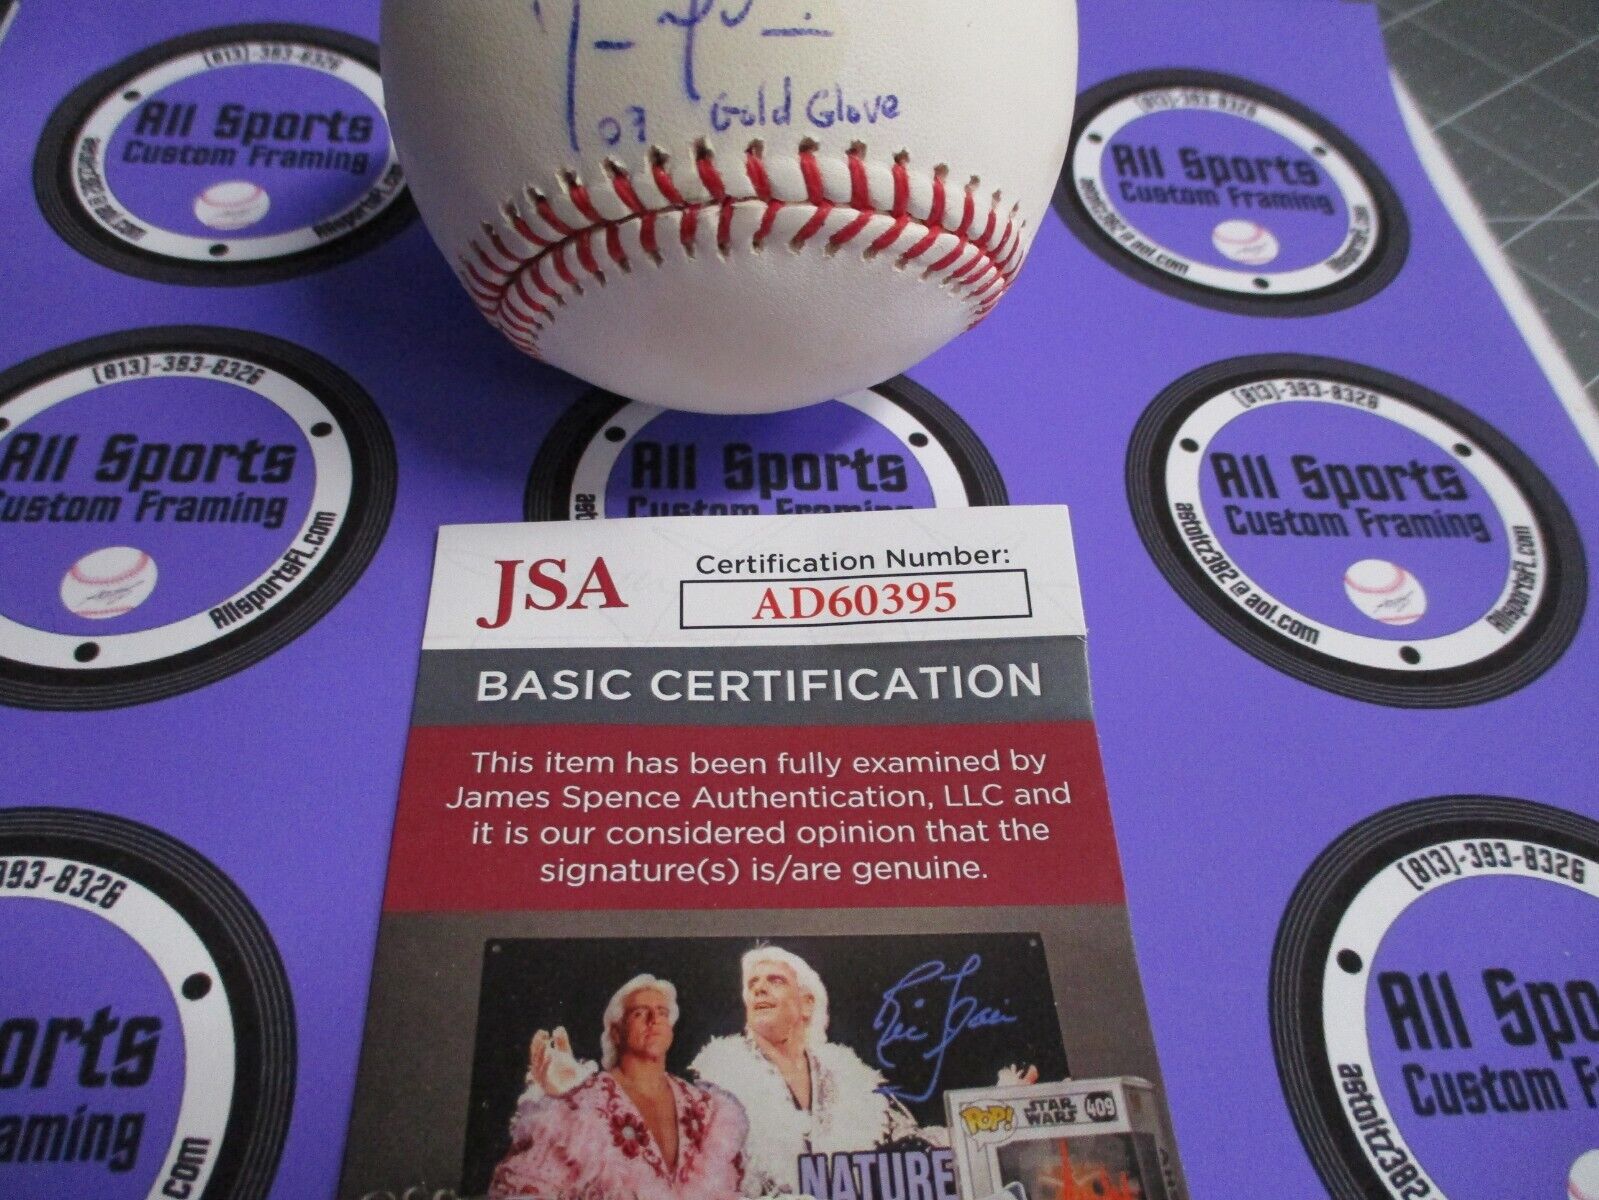 Russell Martin Autographed Baseball Authenticated by JSA #AD60395 07 Gold Glove